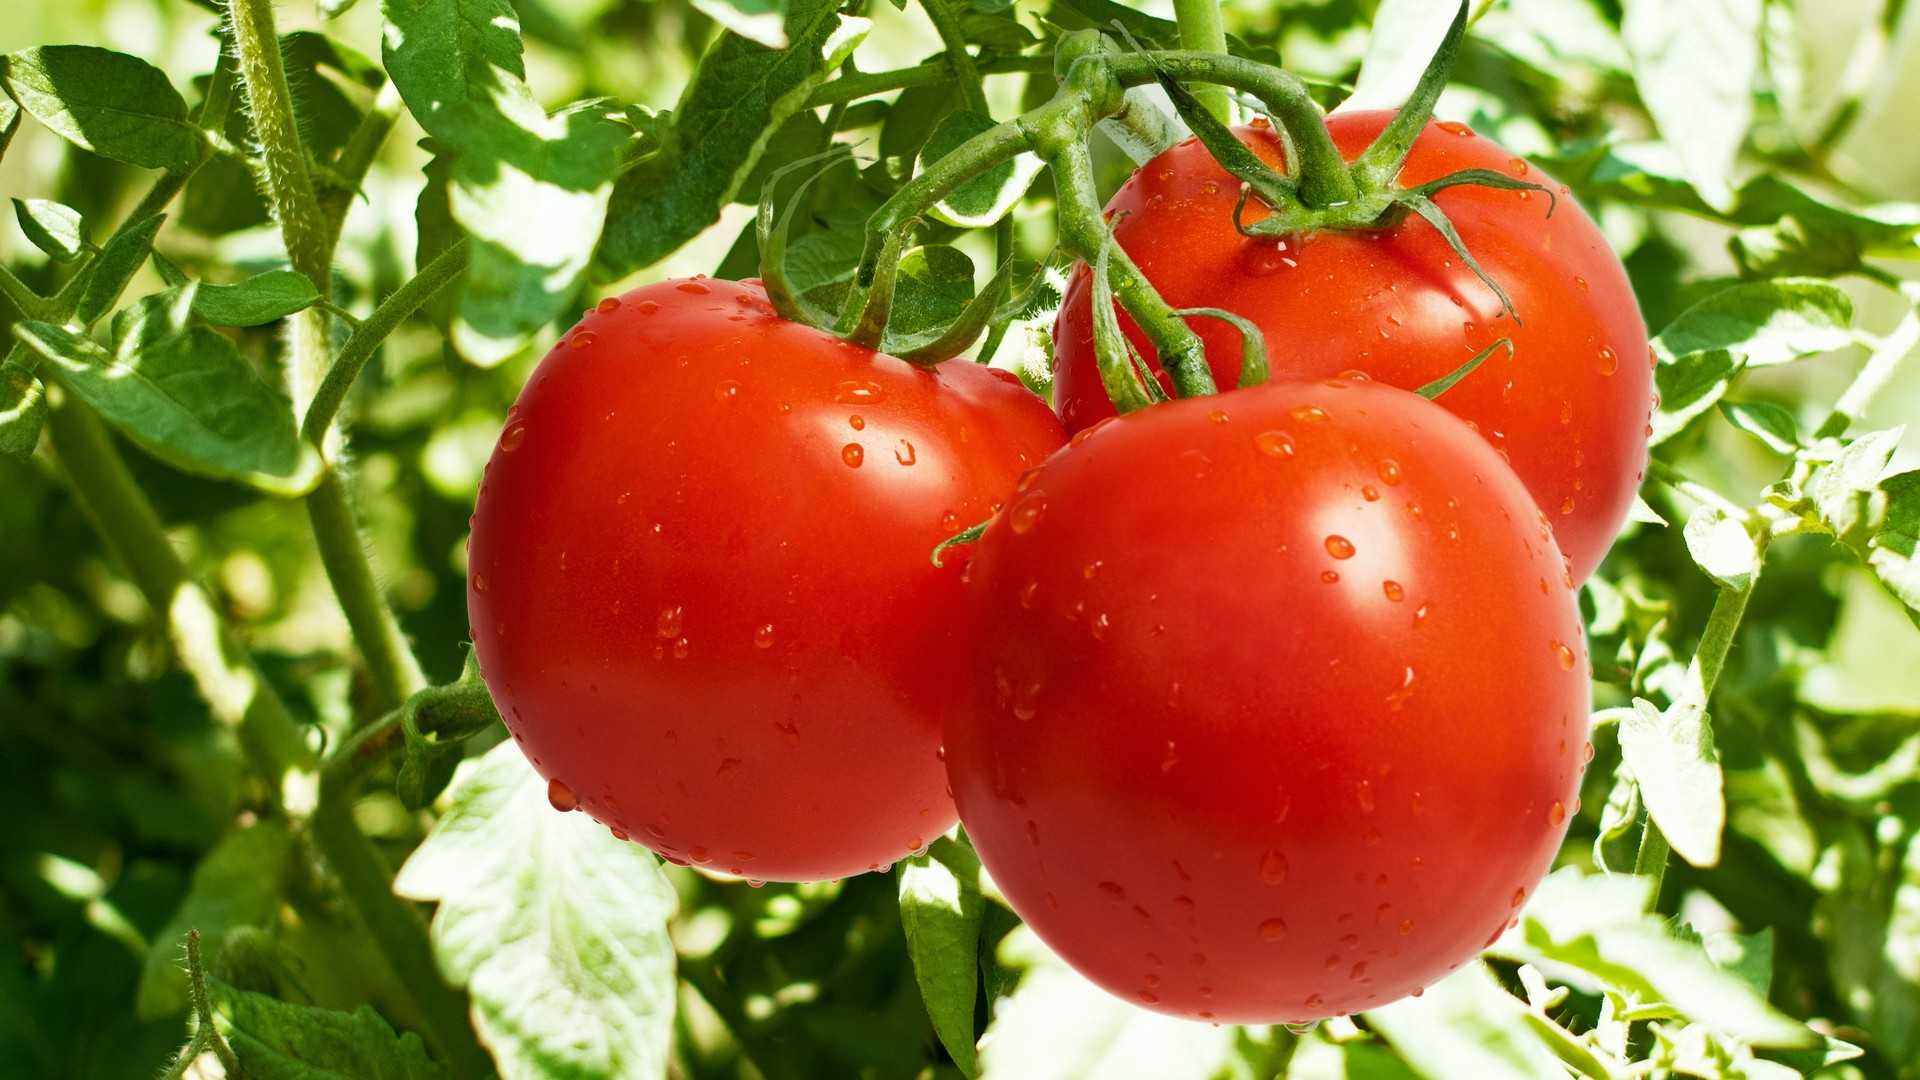 Fresh Tomato Manufacturer & Manufacturer from, India | ID - 1151935